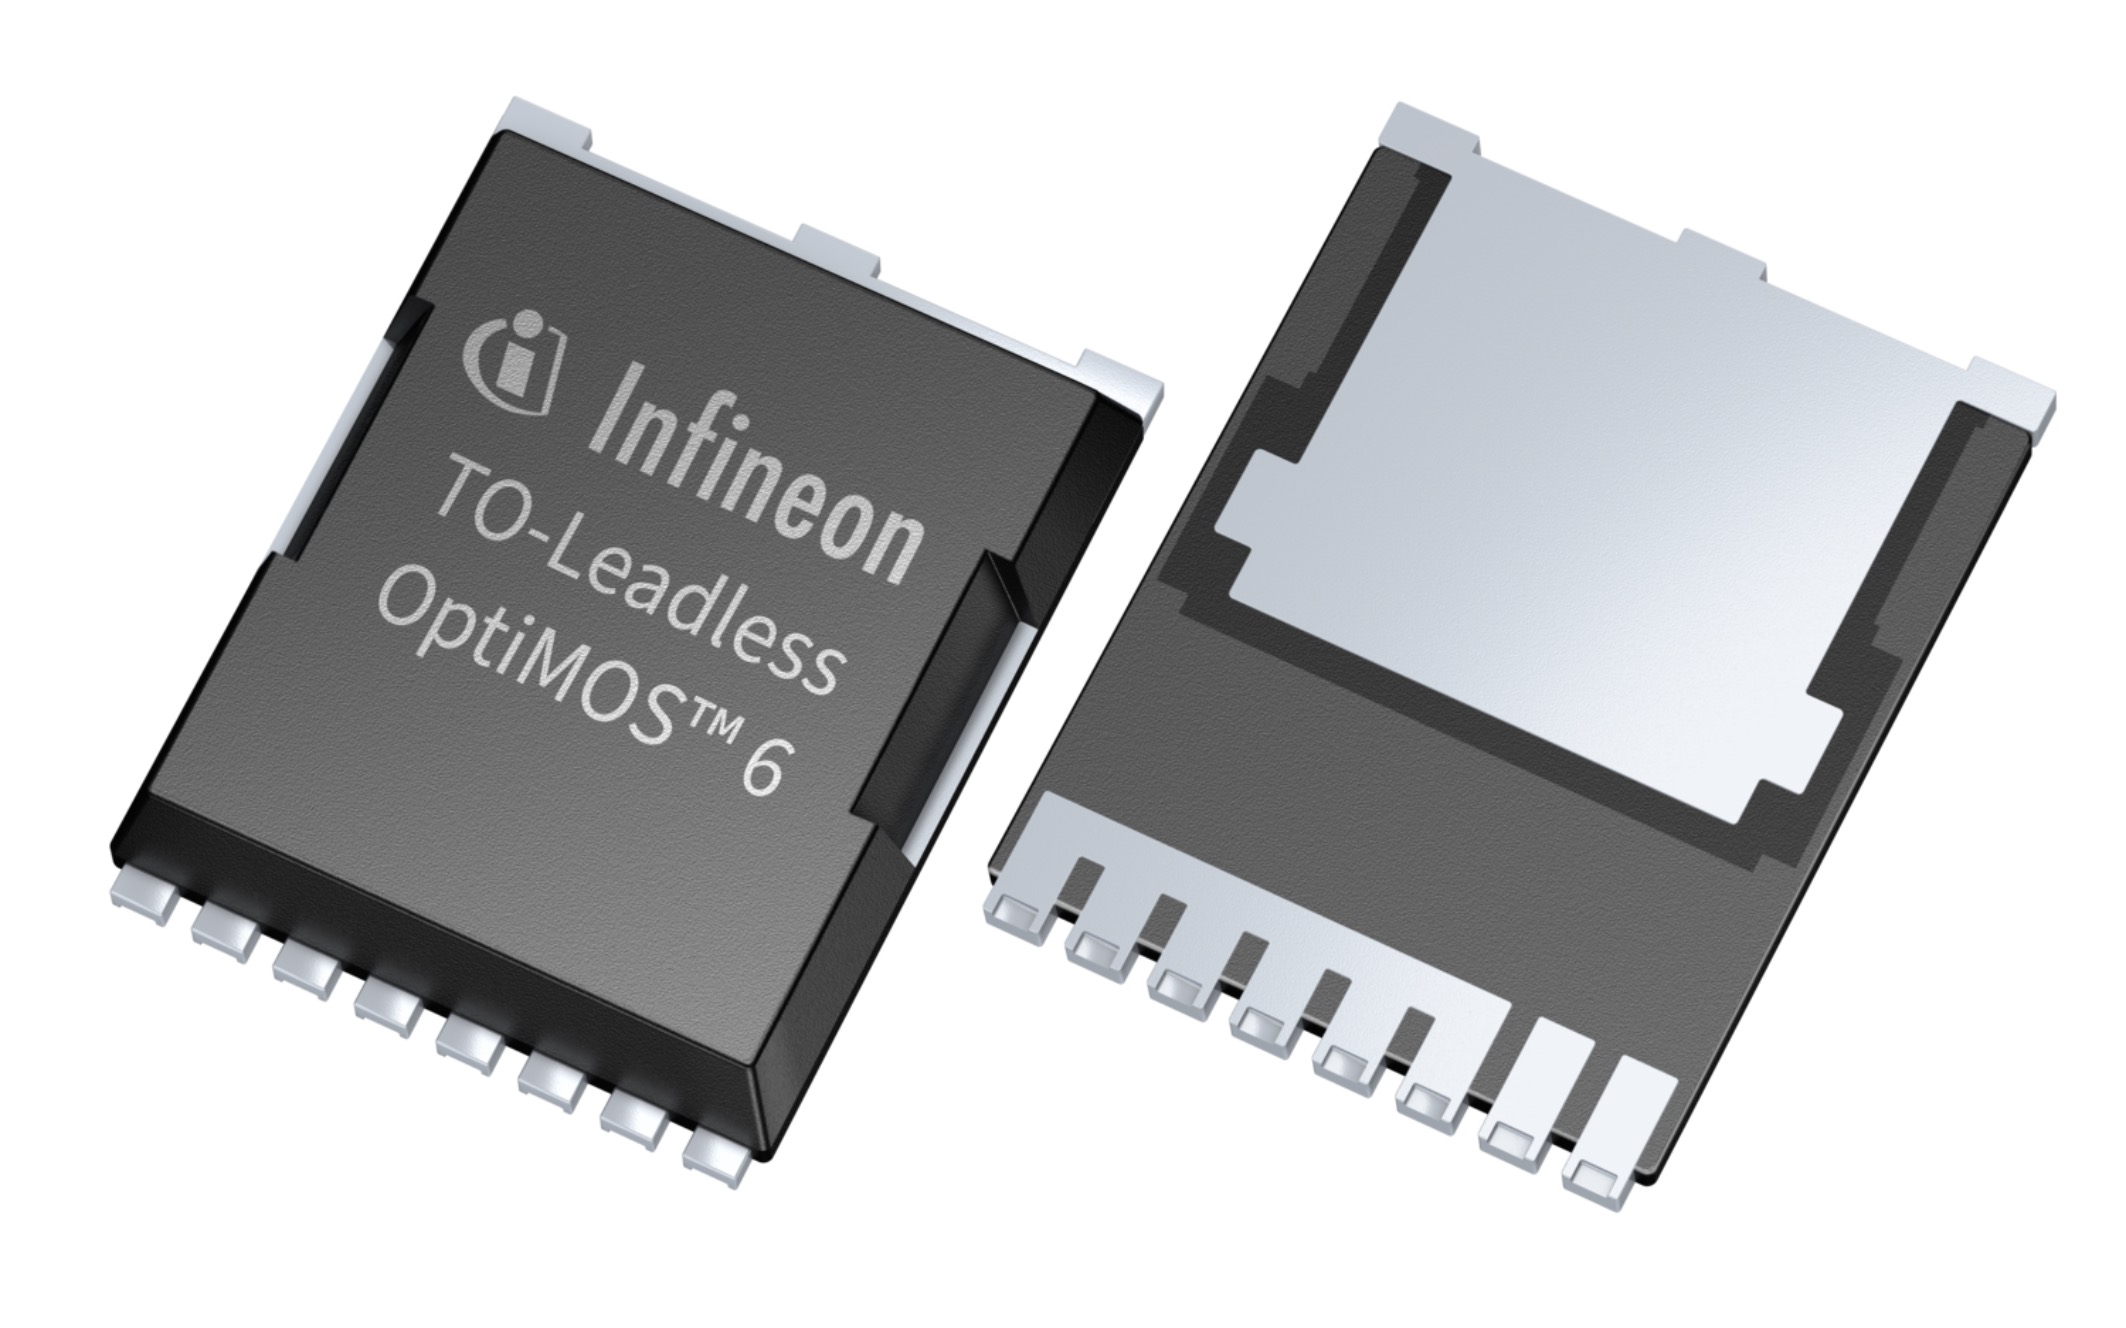 Infineon Sets New Industry Standard for Enhanced Power Density and Efficiency with OptiMOS 6 200 V MOSFETs